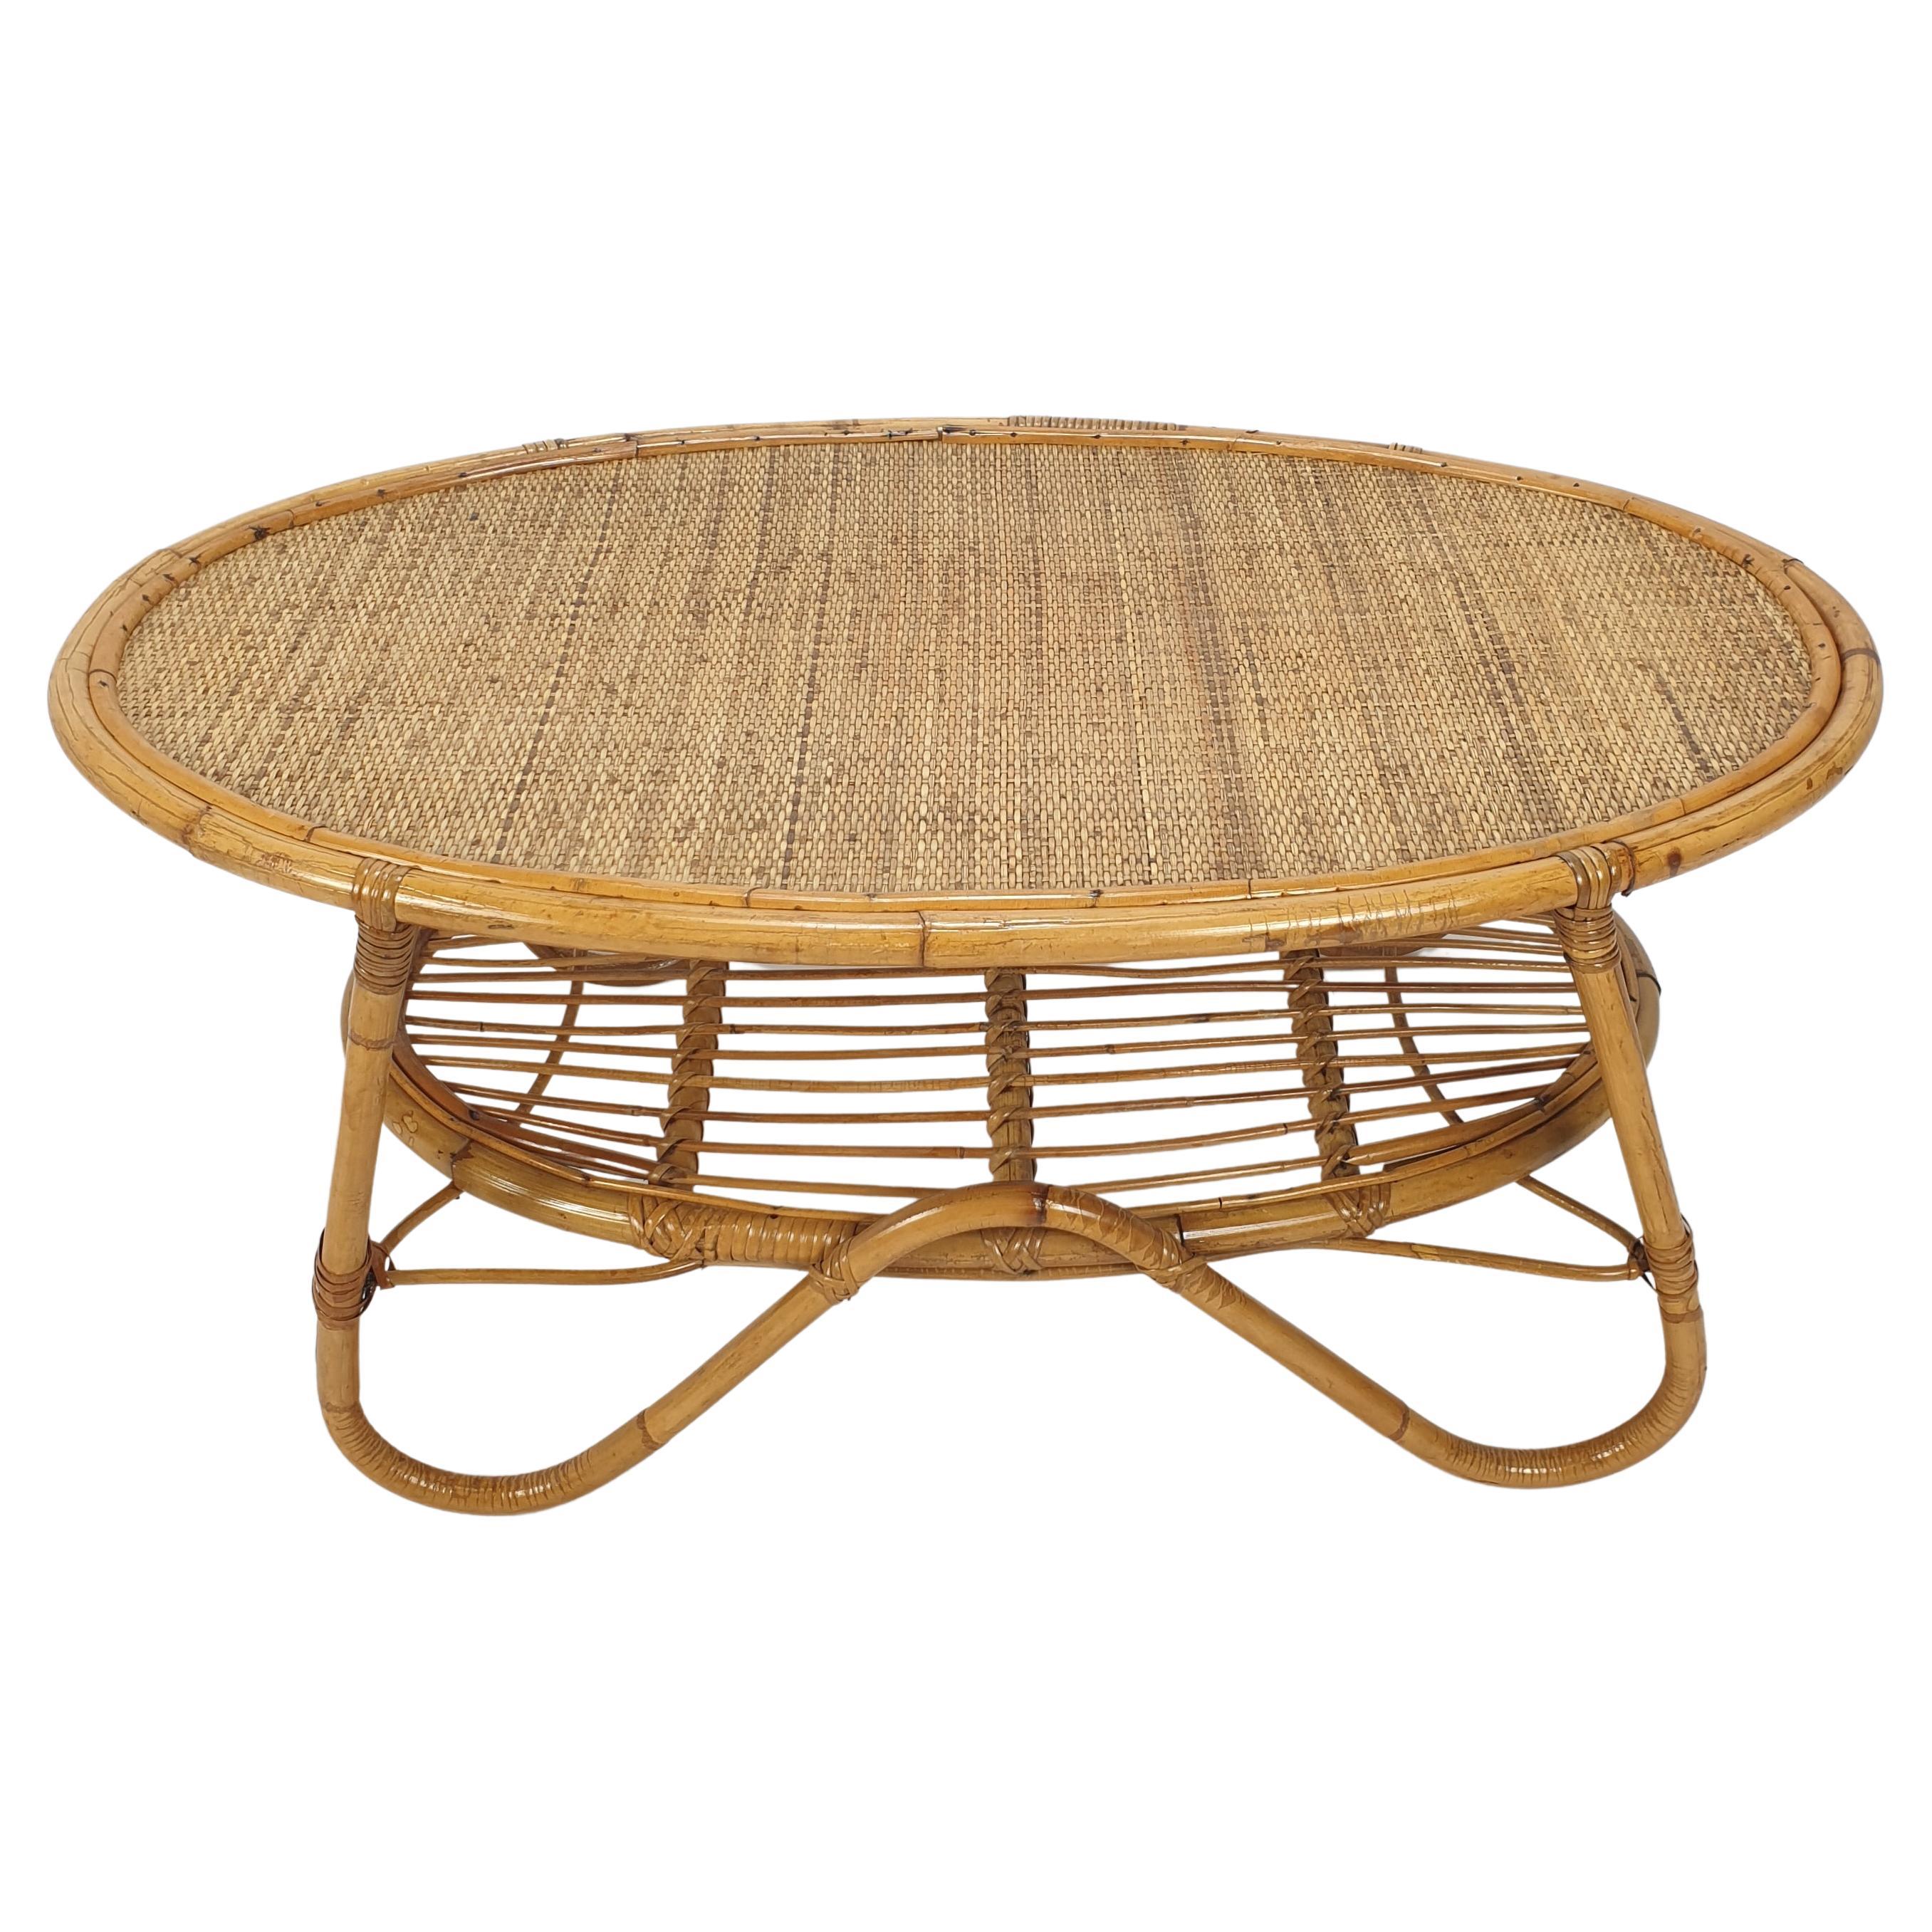 Details about   Vintage French Country Bamboo Wicker Rattan 2-Tier Coffee Cocktail Center Table 